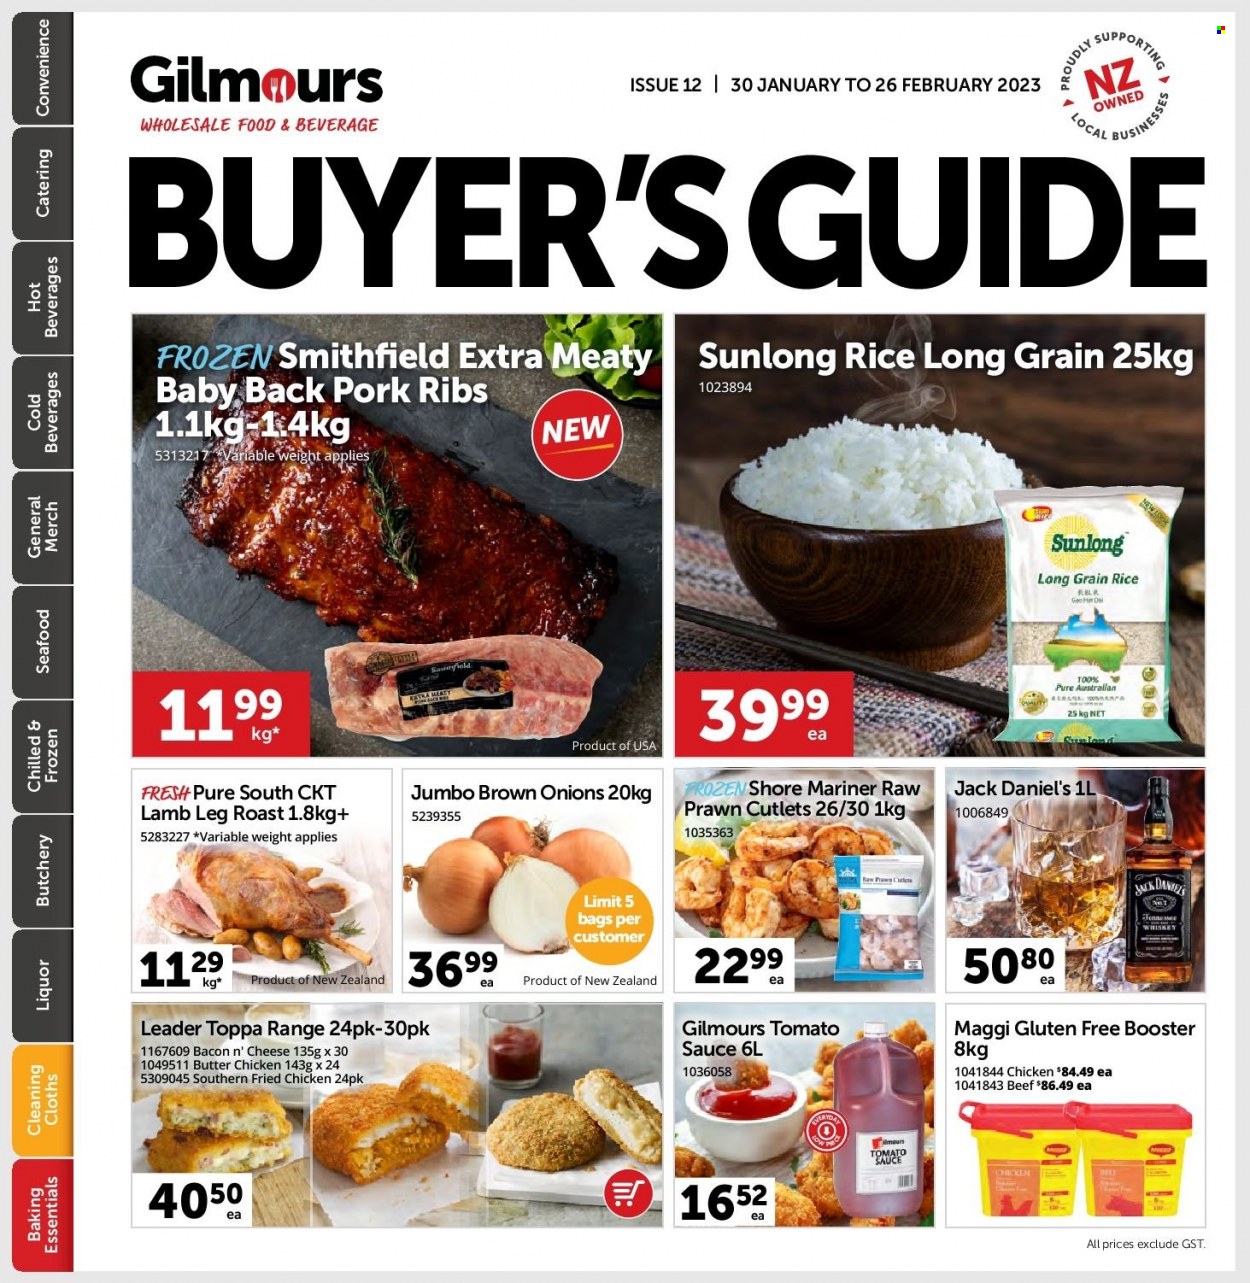 thumbnail - Gilmours mailer - 30.01.2023 - 26.02.2023 - Sales products - onion, seafood, prawns, Shore Mariner, Jack Daniel's, sauce, fried chicken, bacon, cheese, Maggi, tomato sauce, rice, long grain rice, Tennessee Whiskey, whiskey, whisky, ribs, pork meat, pork ribs, pork back ribs, lamb meat, lamb leg. Page 1.